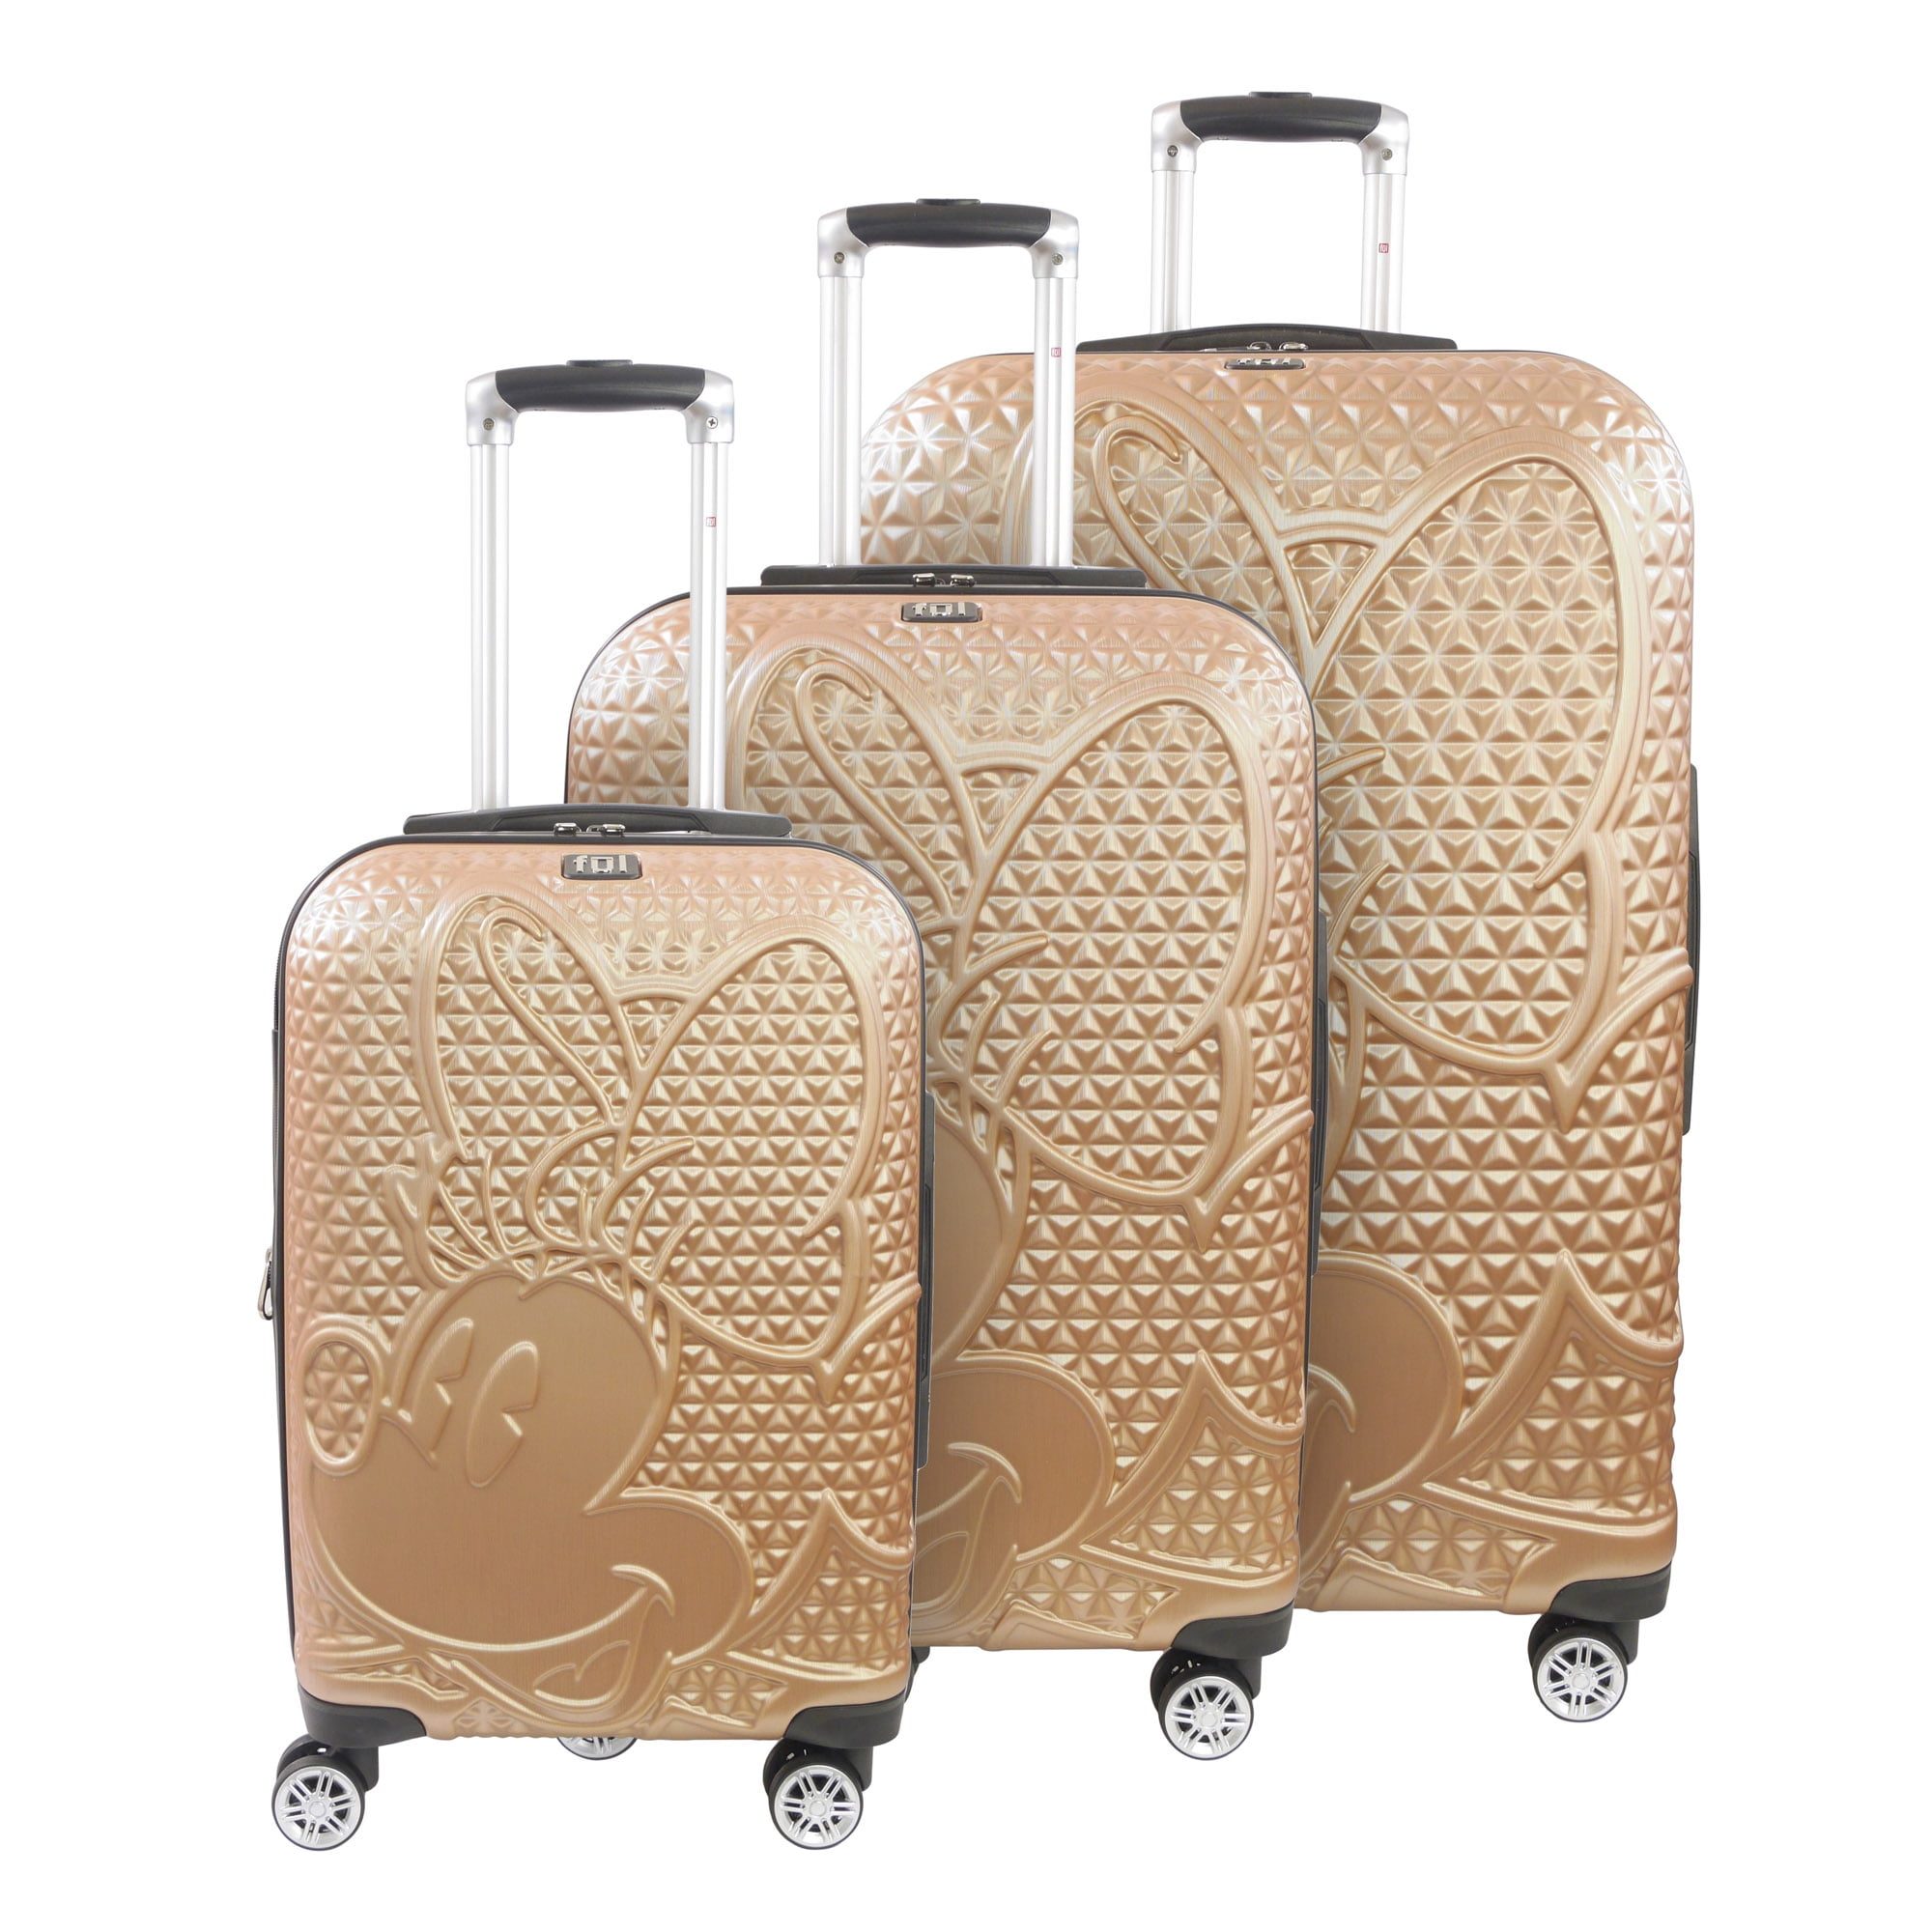 Disney Ful Textured Minnie Mouse Hard Sided 3 Piece Luggage Set, Taupe ,  29, 25, and 21 Suitcases 